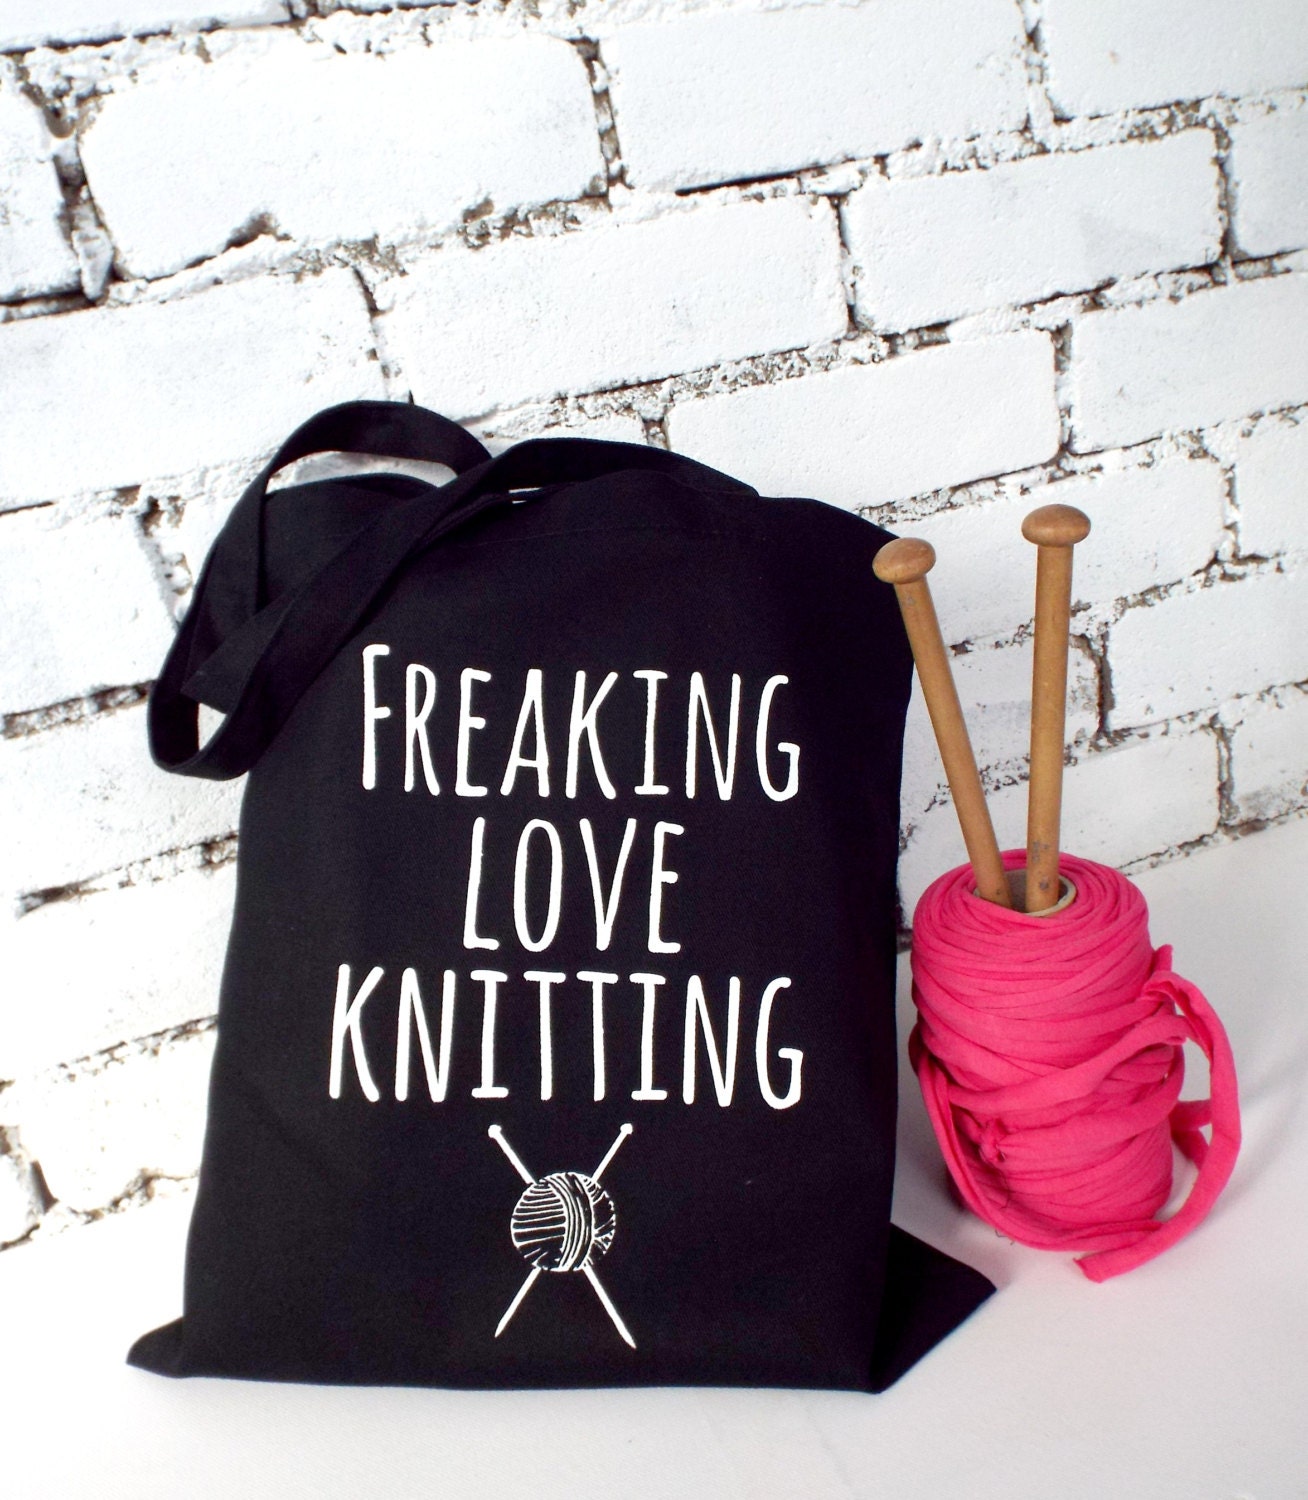 10 Awesome Knitting Bags for Crafty Knitters! 